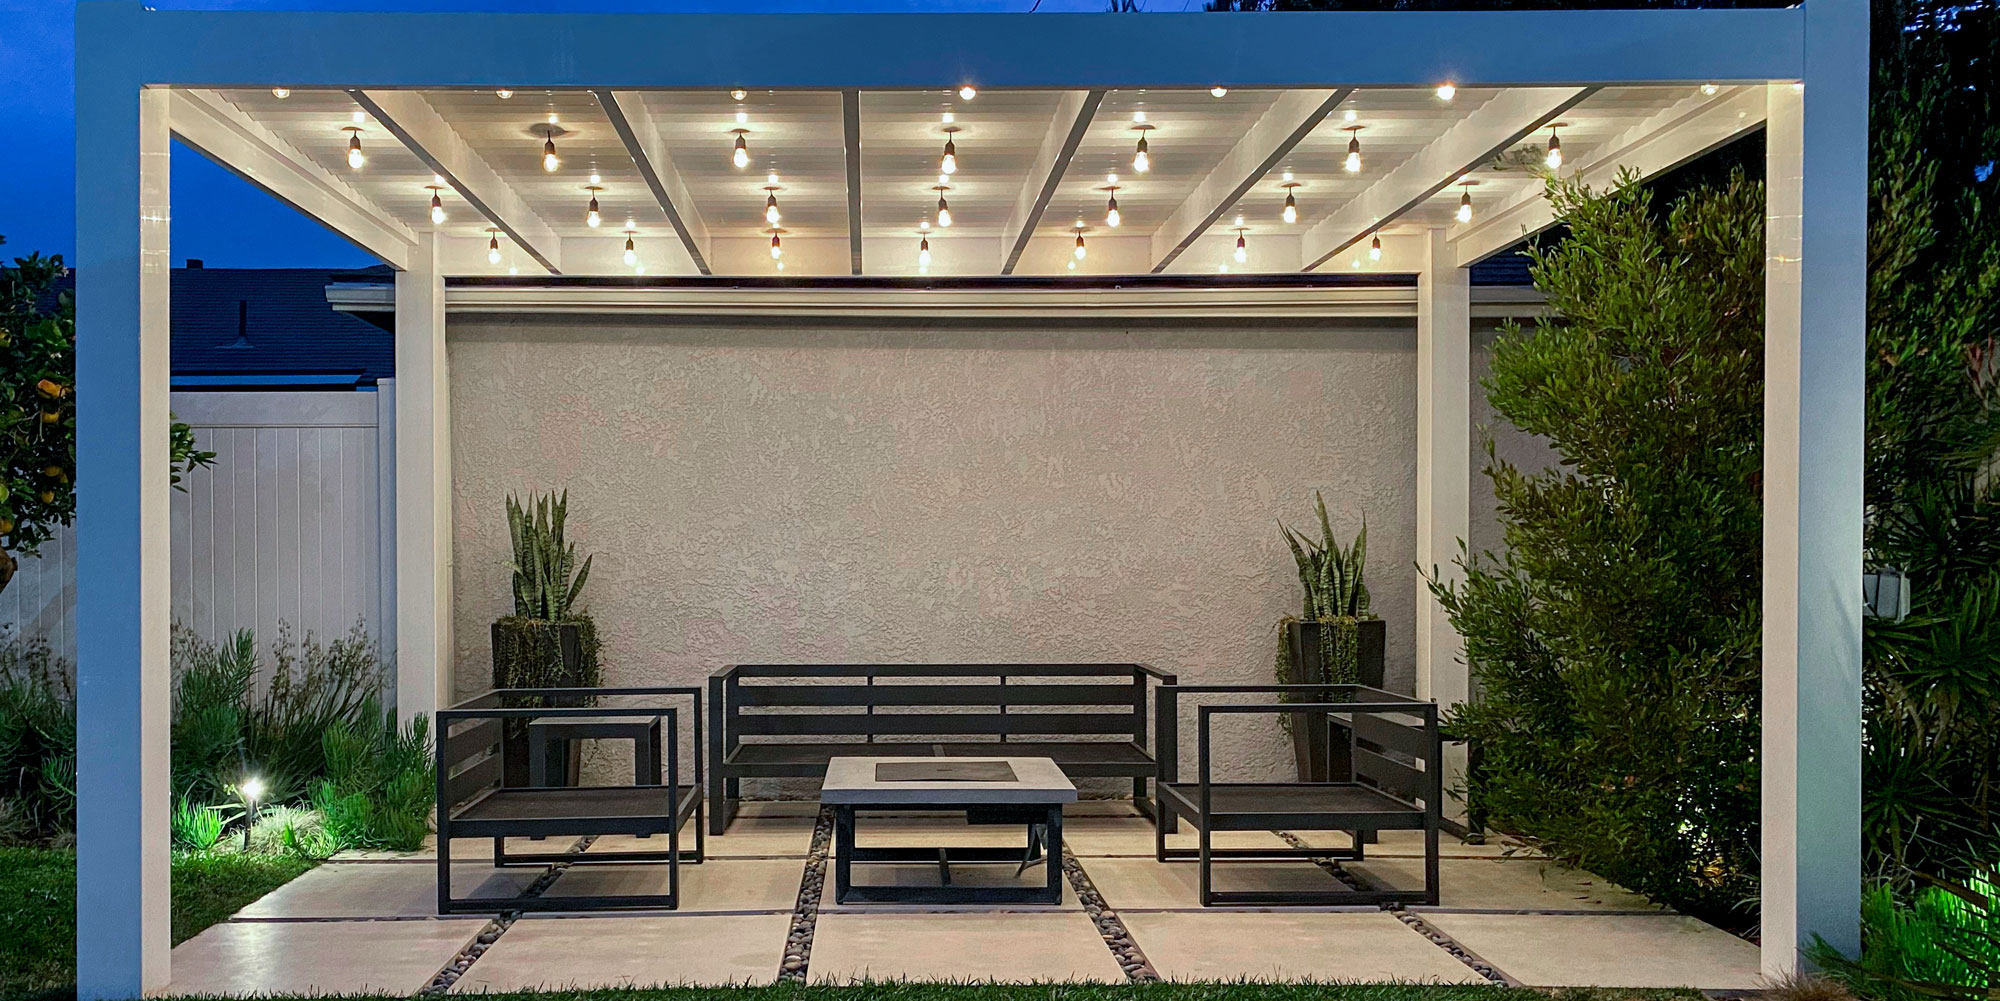 white modern vinyl pergola over a patio at night lit up with bistro lights